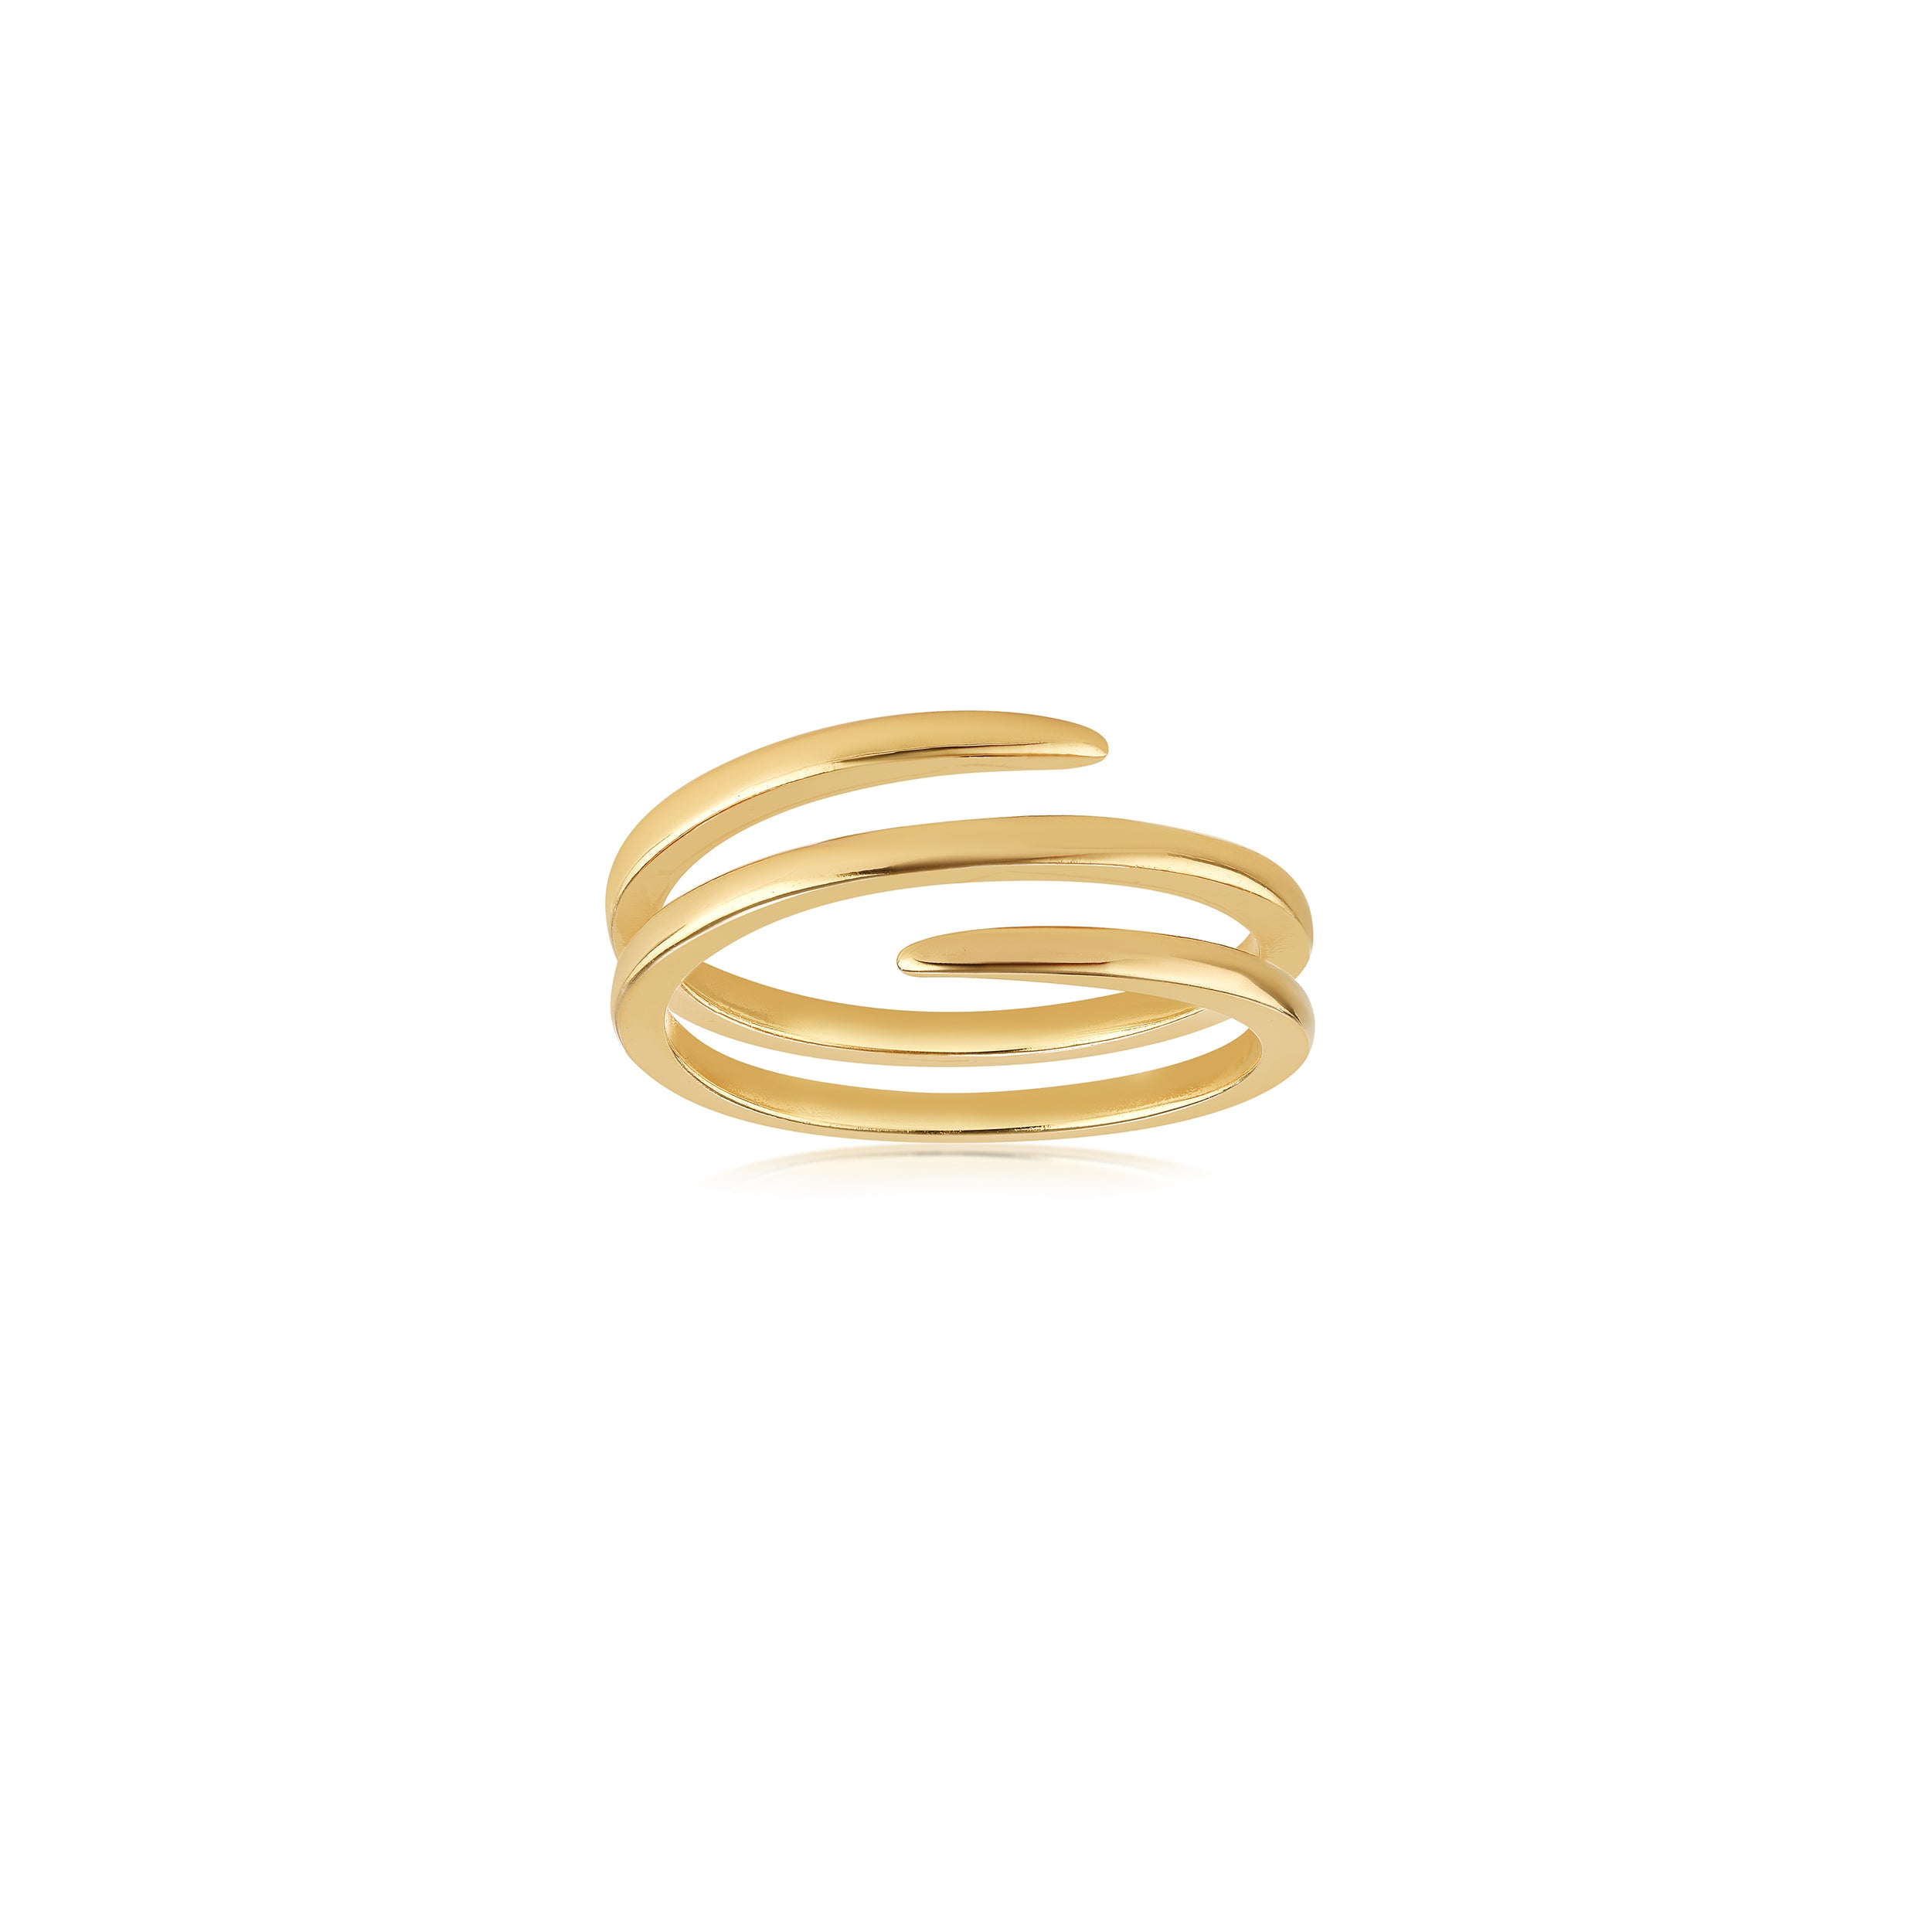 SOLID SPIRAL RING